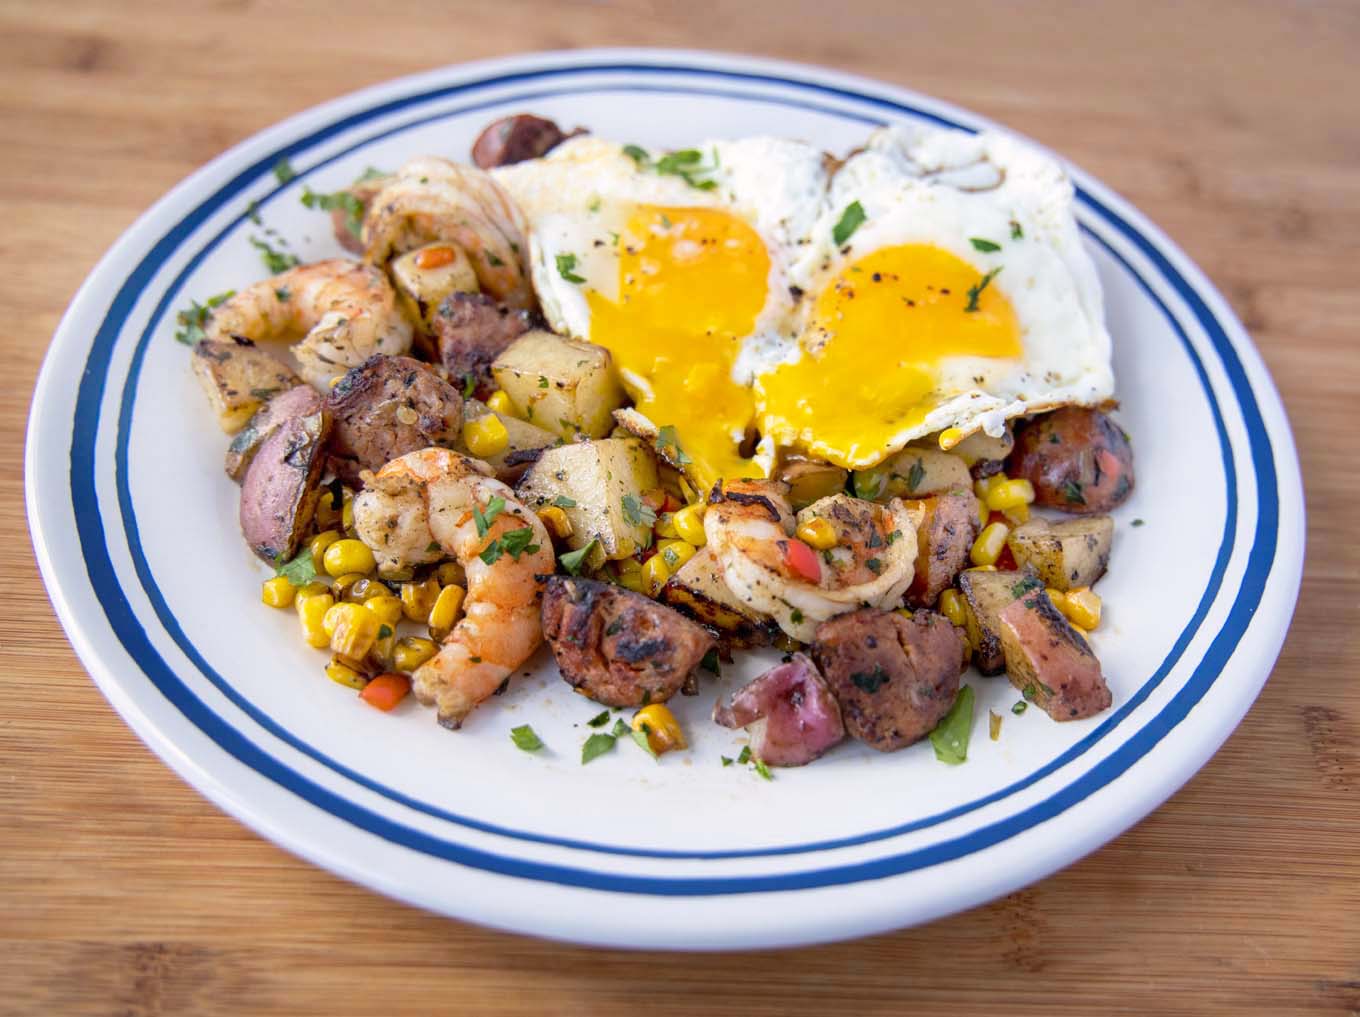 shrimp and andouille mixture with two sunny side up eggs with the yolks running on the misture